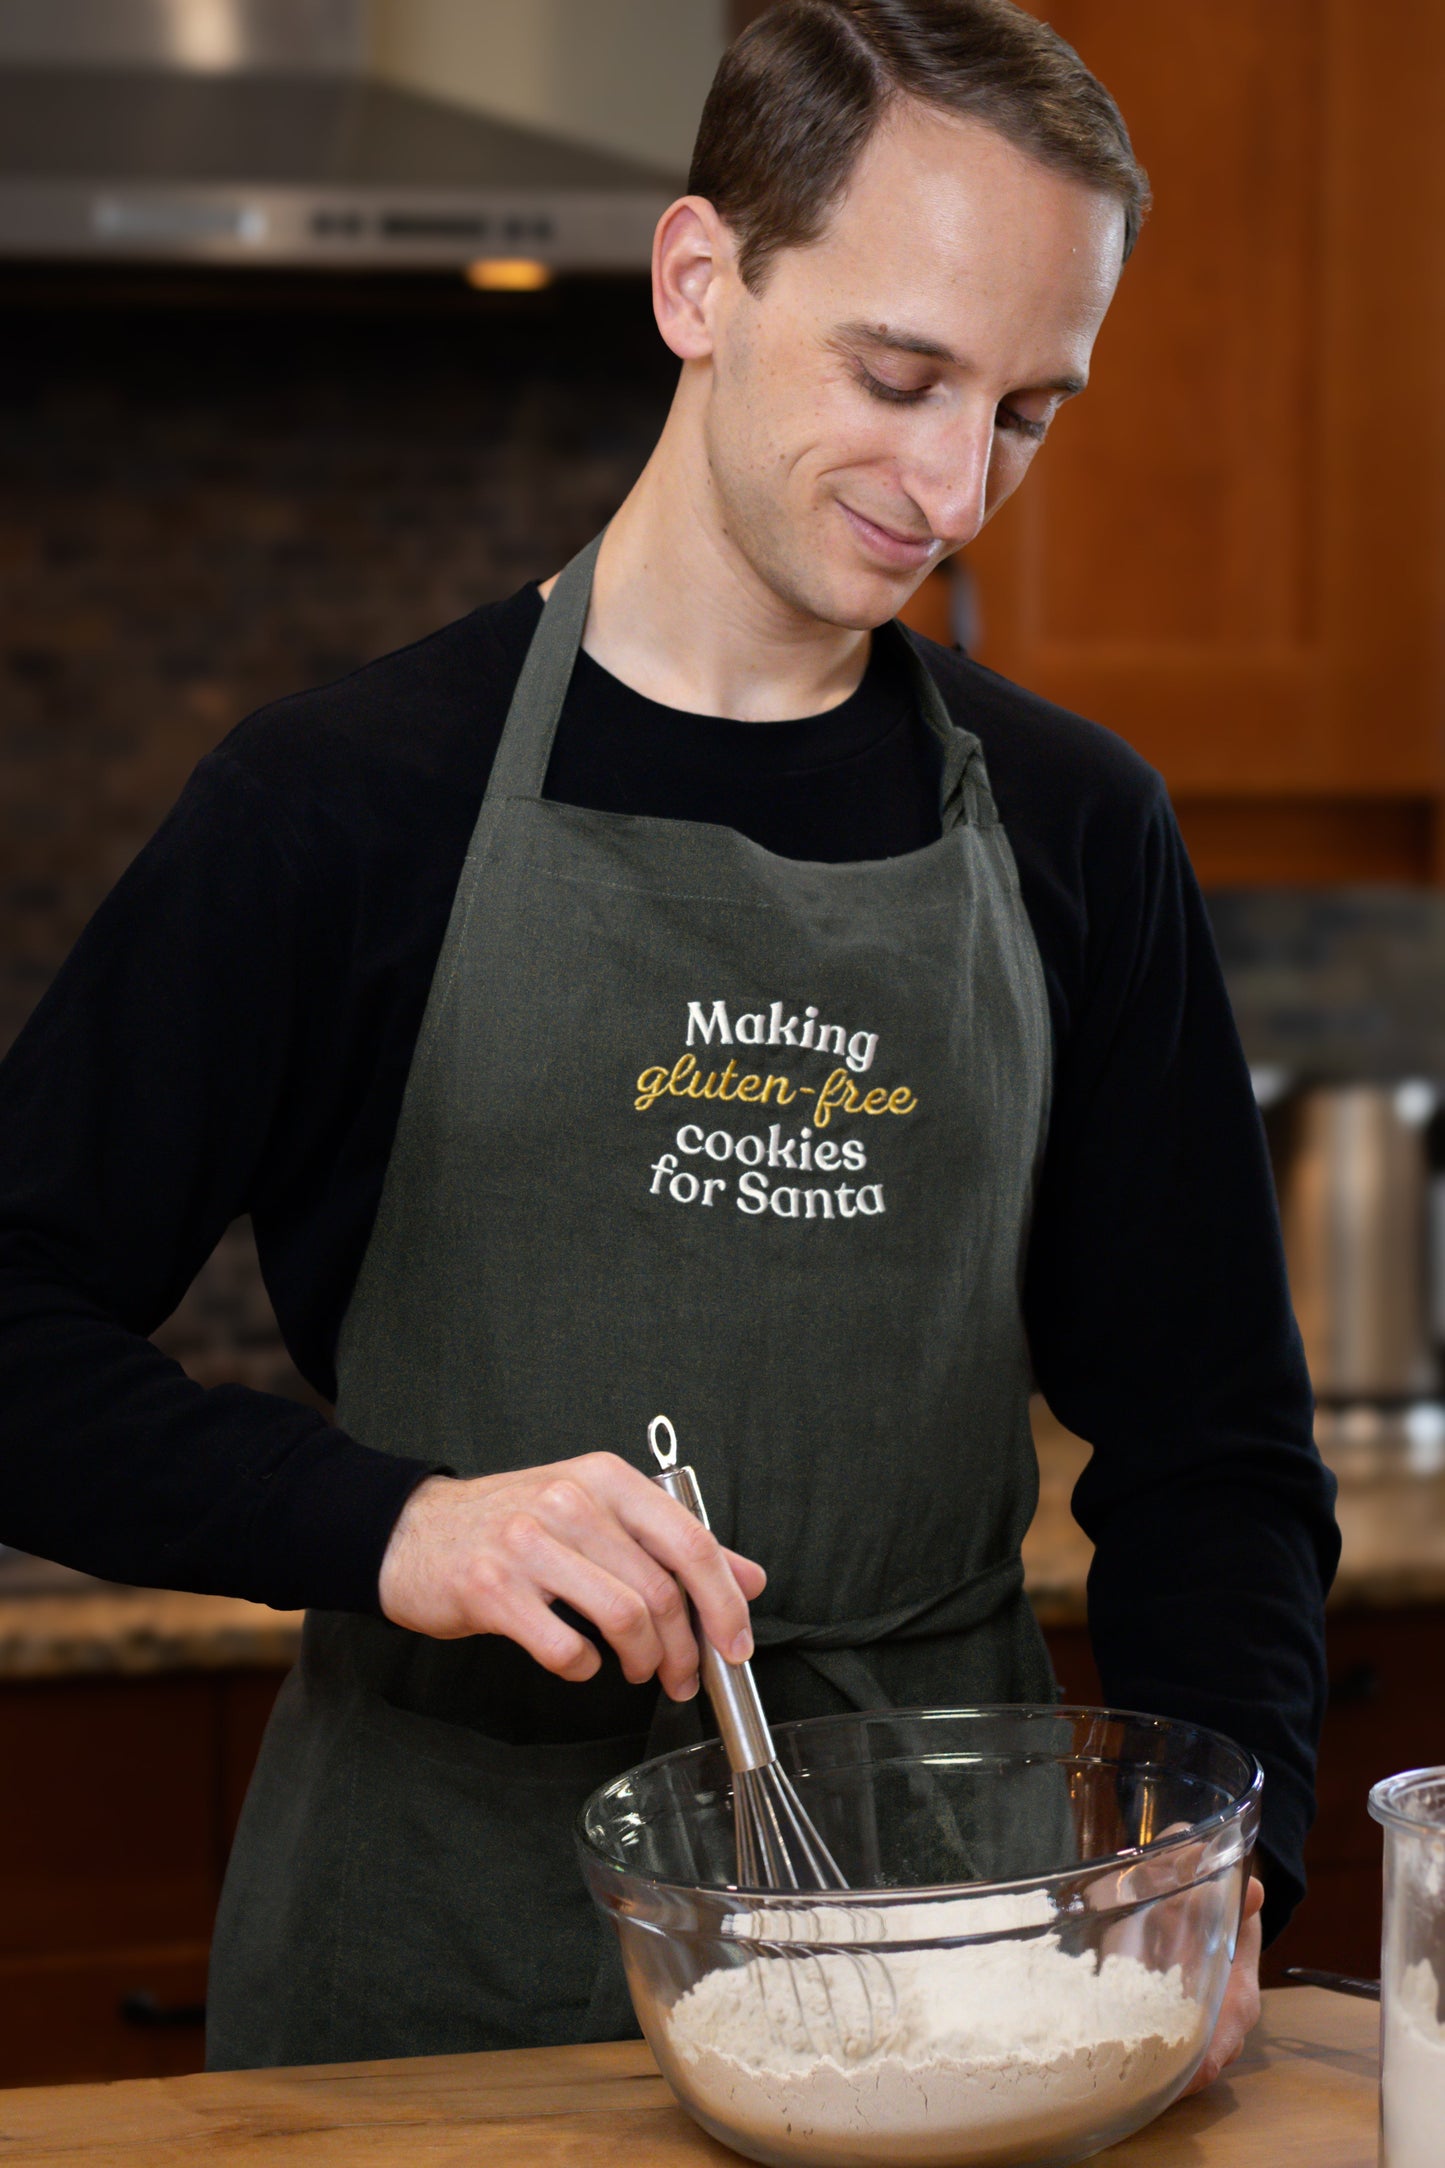 Man wearing green Christmas apron with "Making gluten-free cookies for Santa"